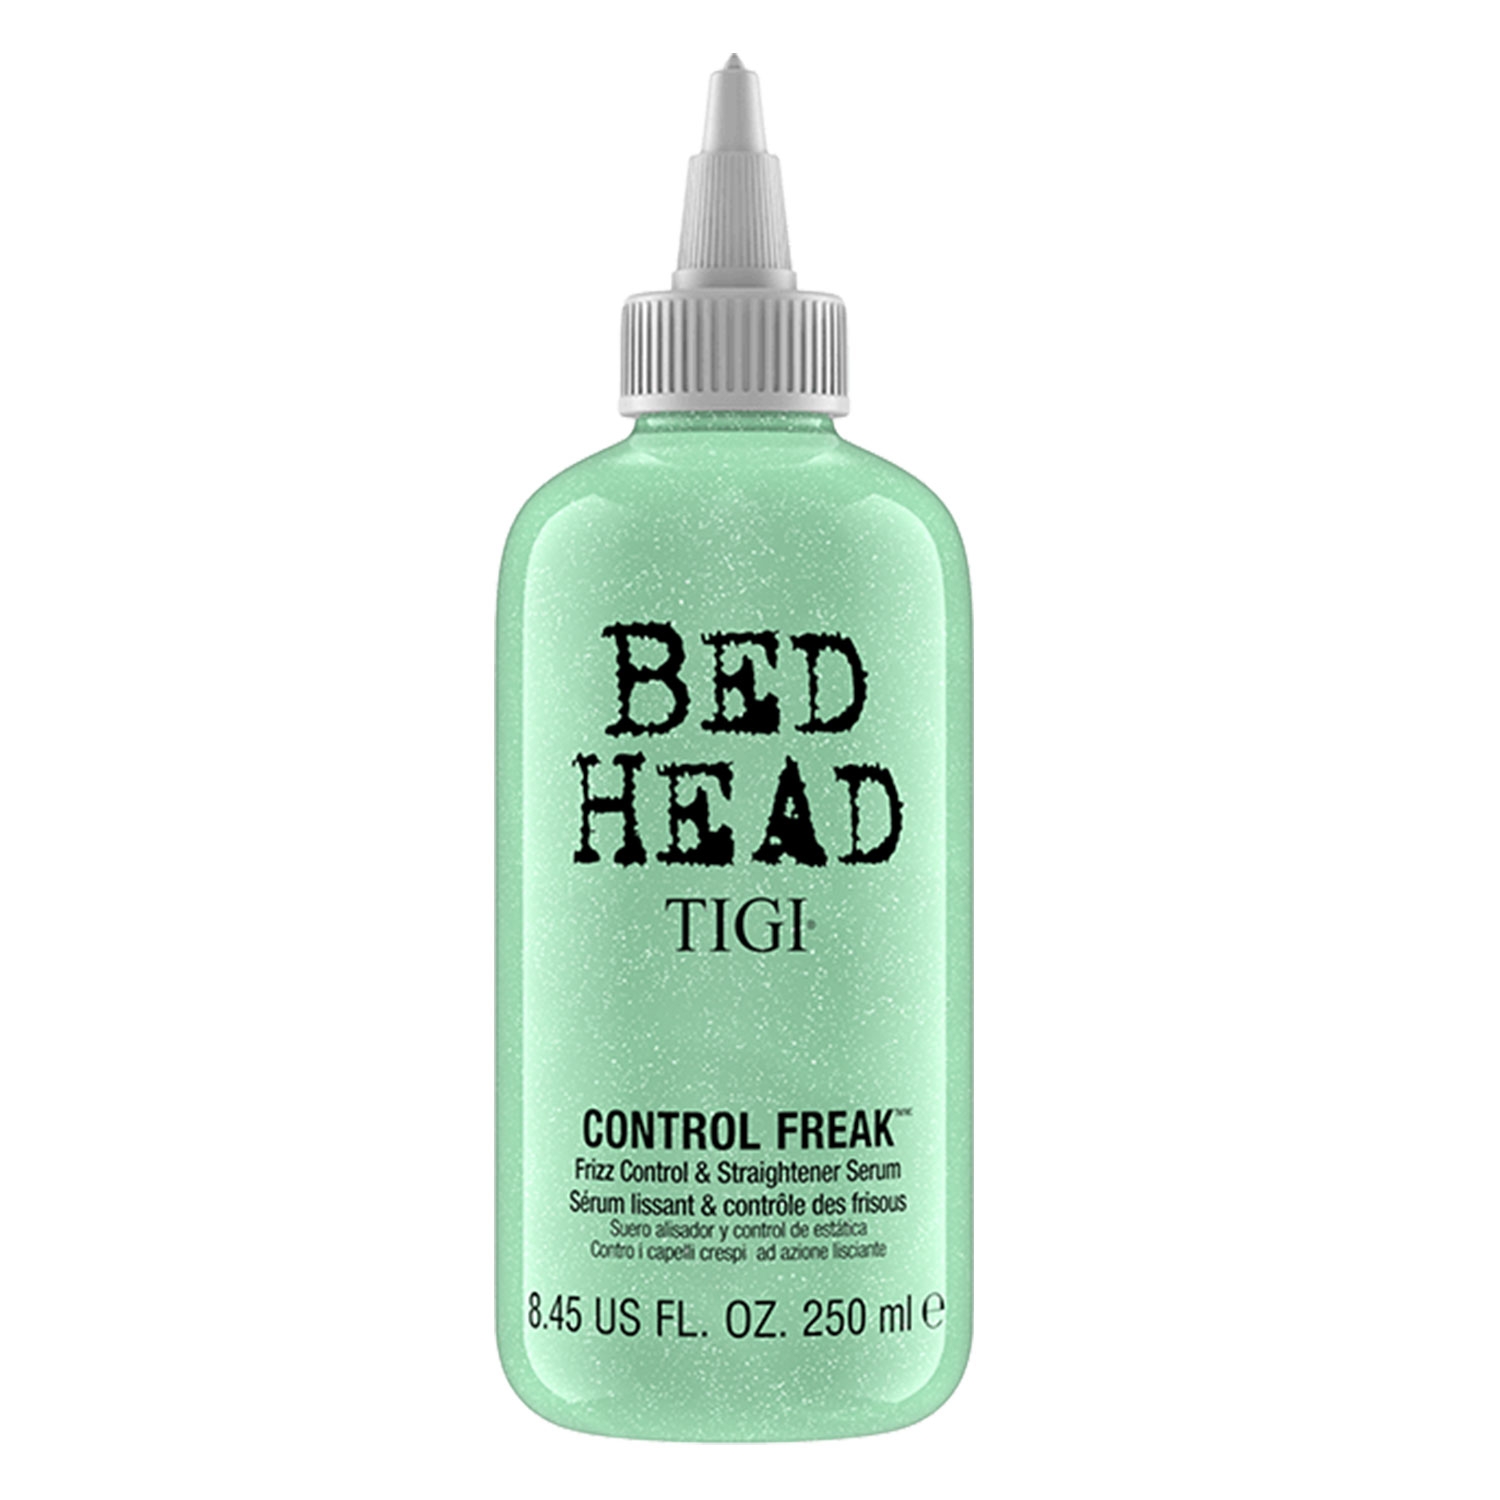 Product image from Bed Head - Control Freak Serum